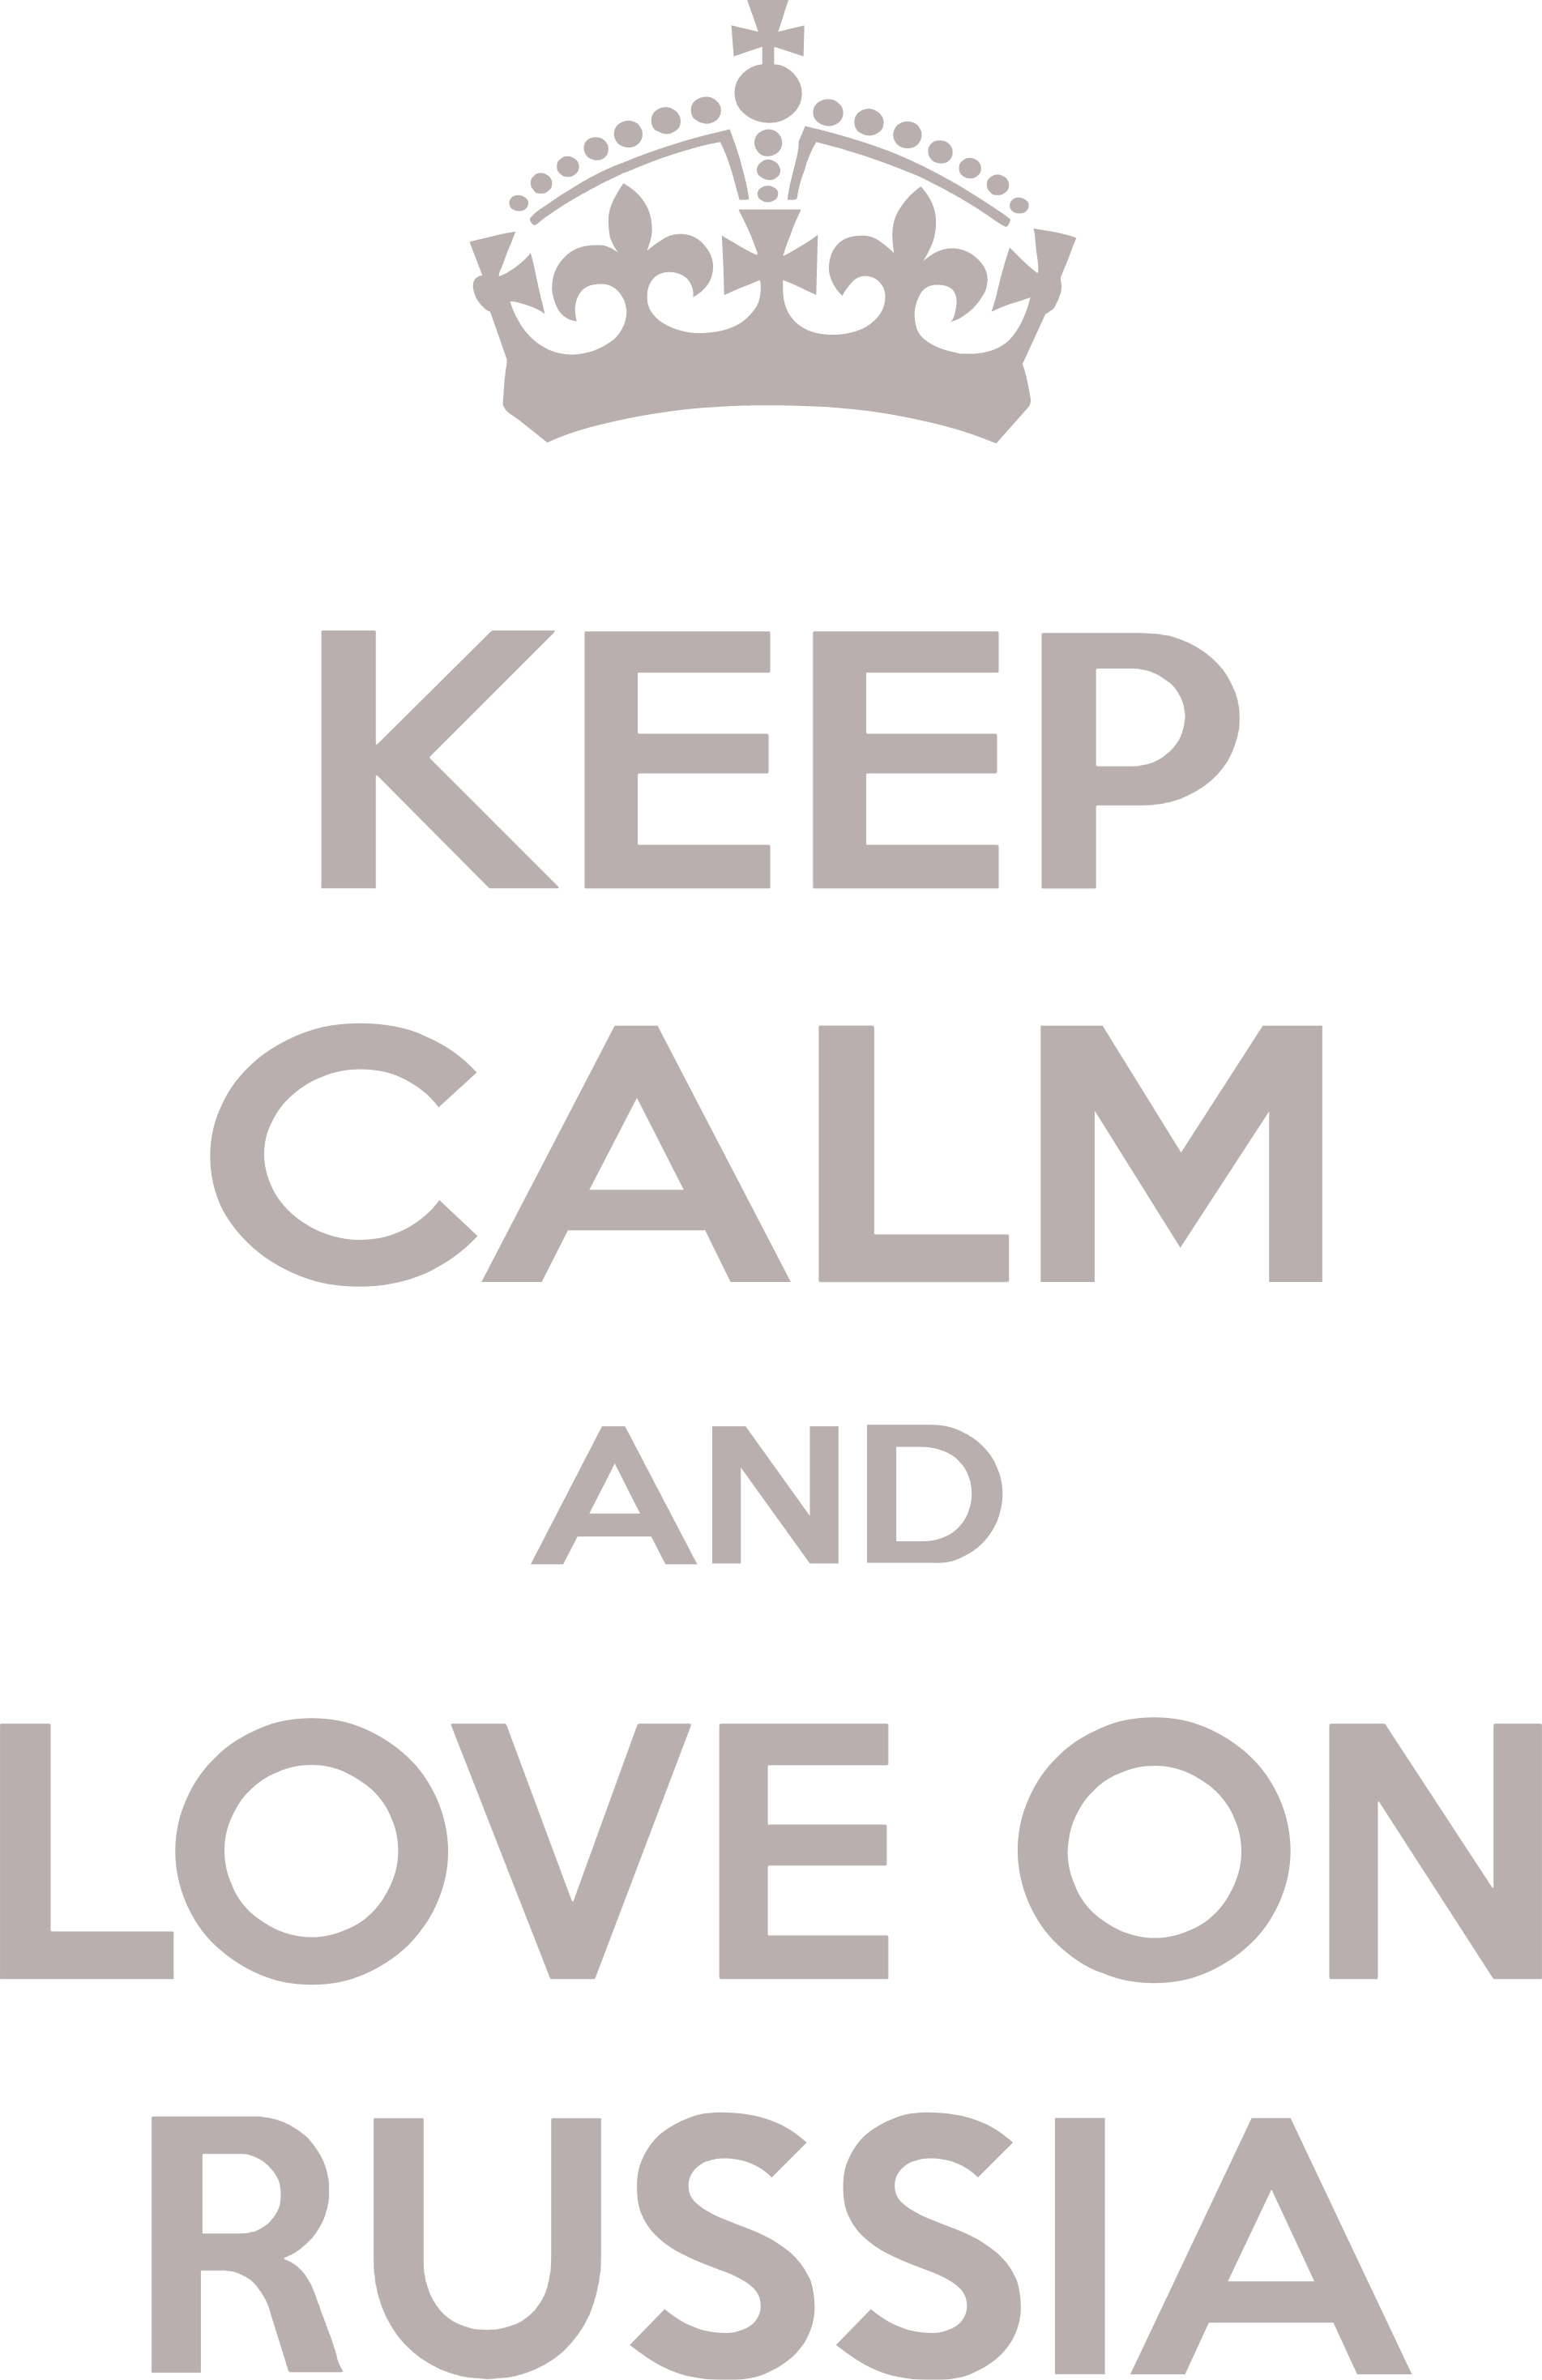 Keep calm and love on Russia